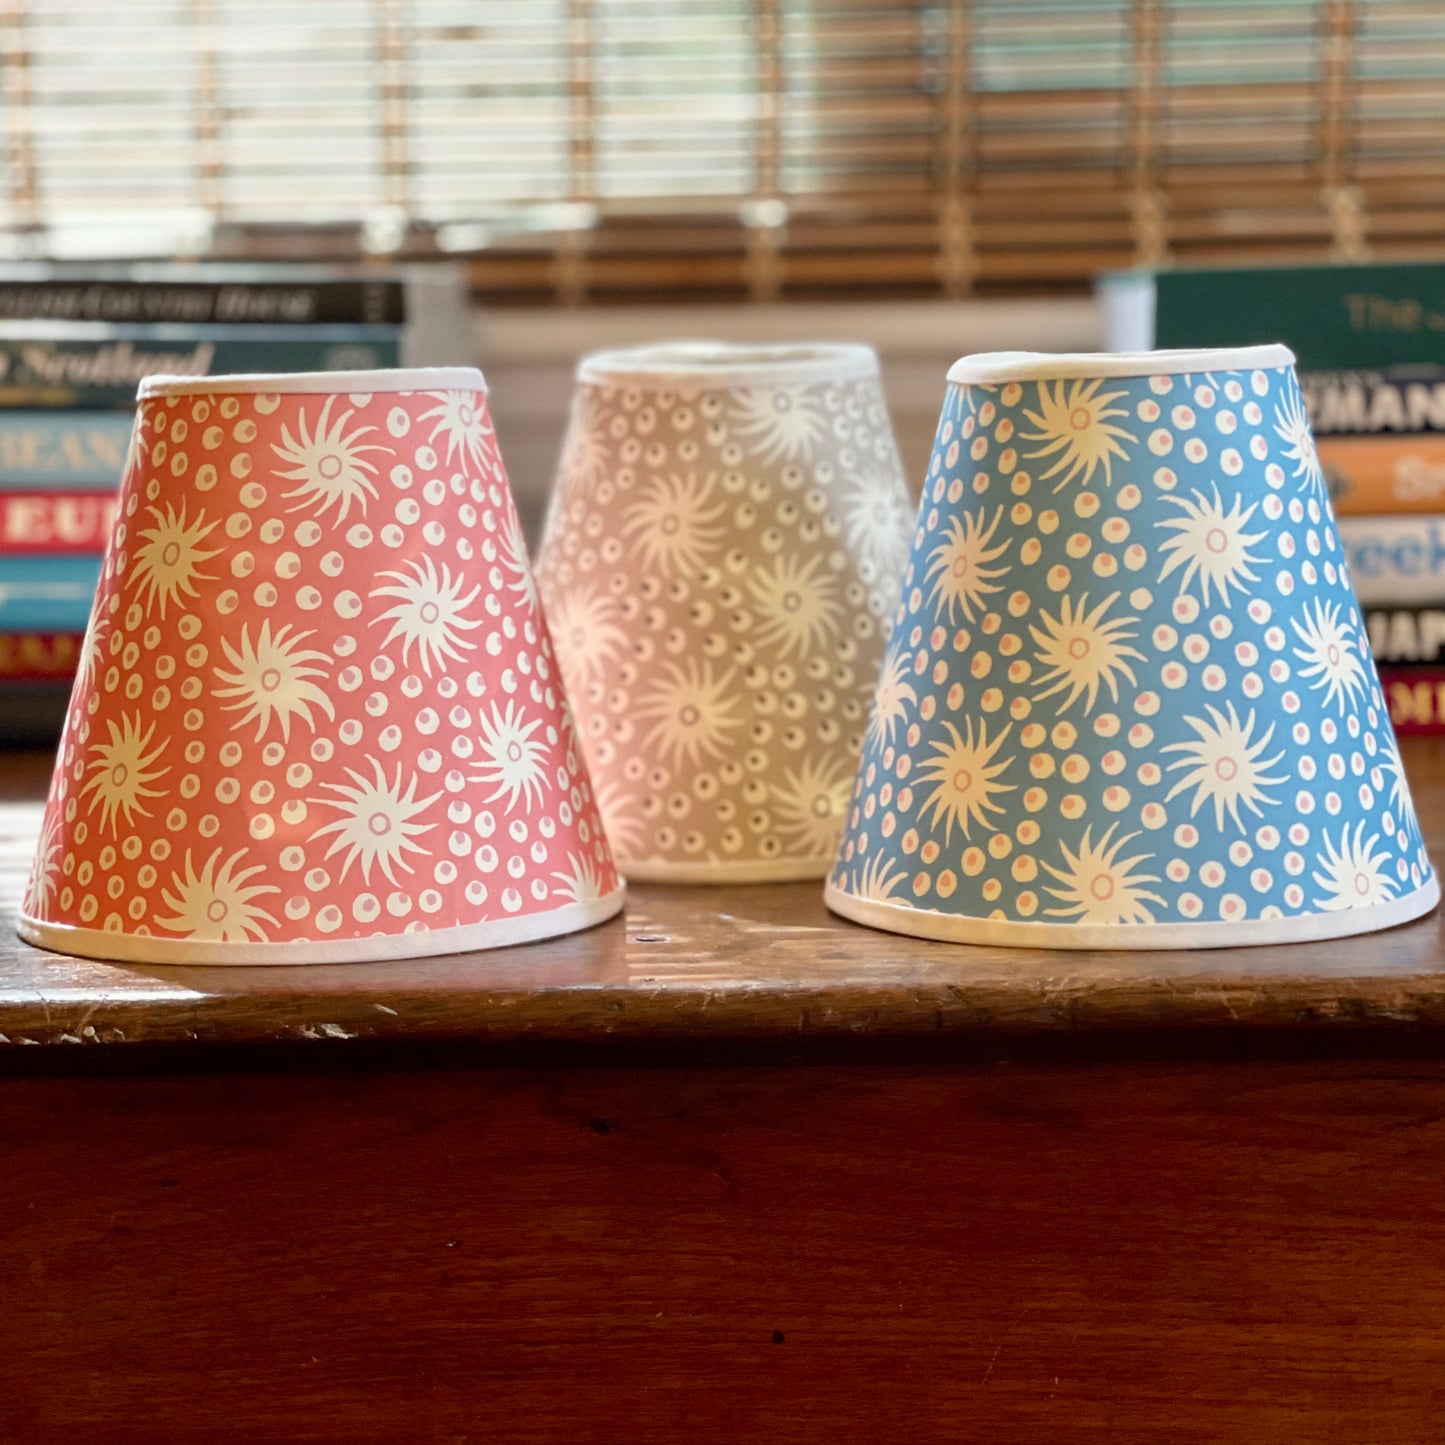 Small Clip-On Lampshade. Patterned Paper from England. "Milky Way" Smoke. White Trim.